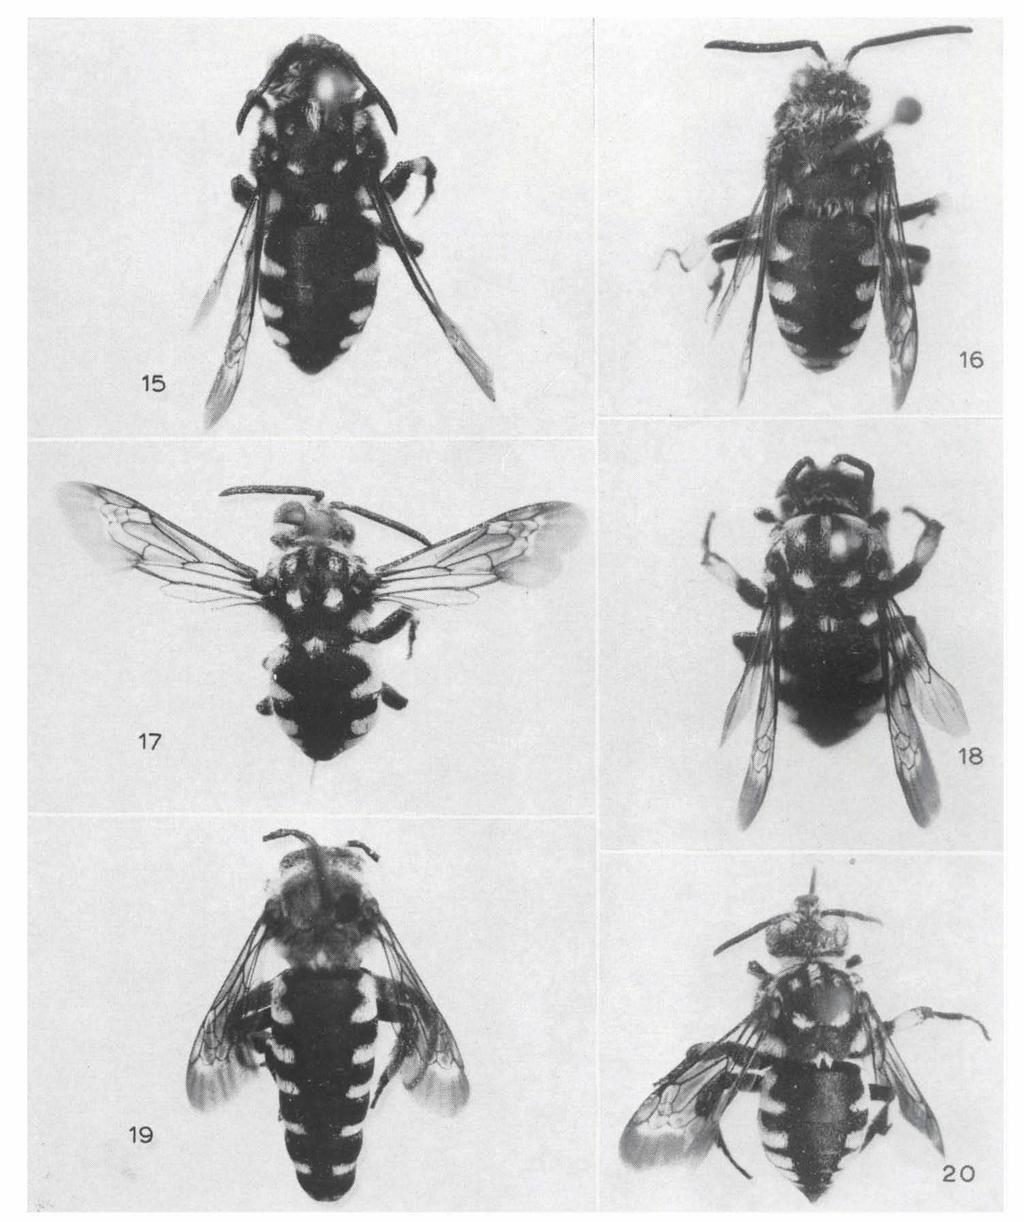 ZOOLOGISCHE VERHANDELINGEN 98 Fig. 15. Thyreus altaicus (Rad.), 9 holotype from Minusinsk (South Siberia). Fig. 16. T. mauretaniensis (Strand), $ holotype from Algeria. Fig. 17. T. histrionicus (III.